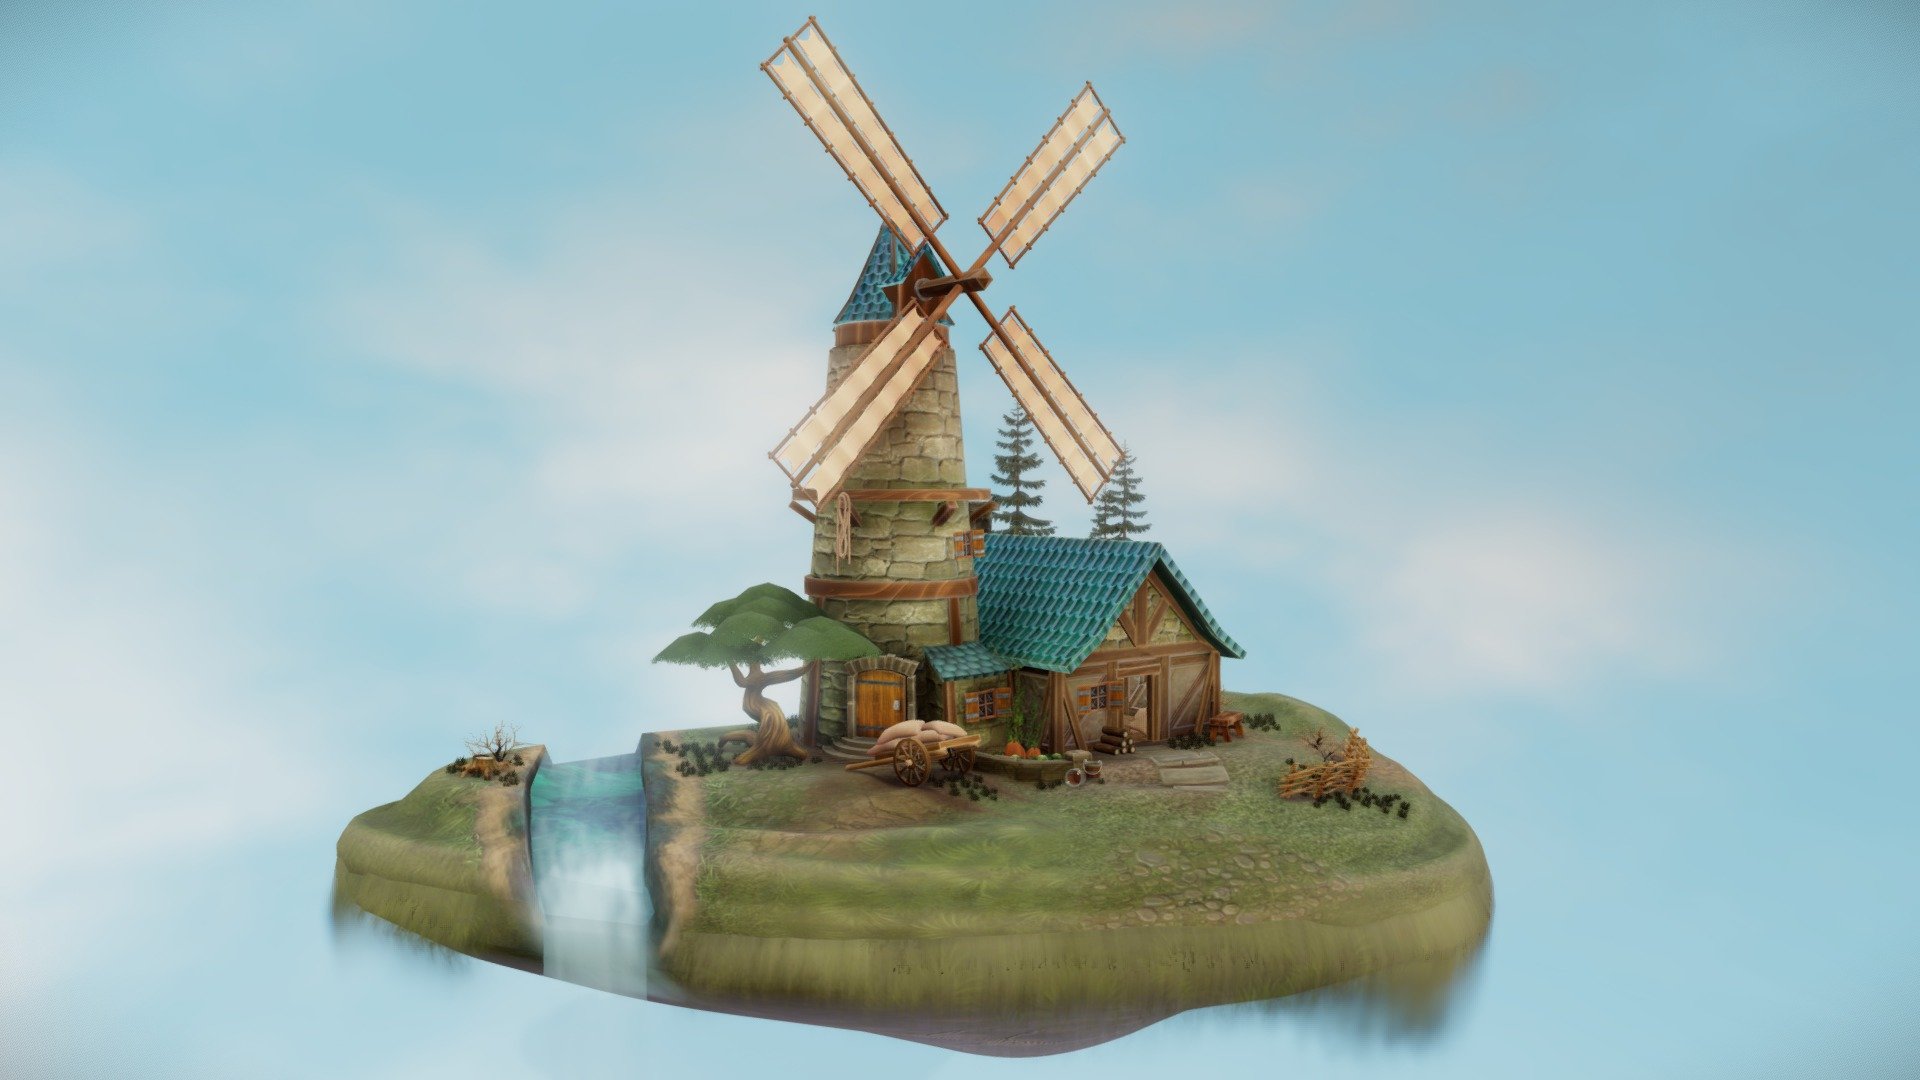 The stylized mill was modeled in 3ds Max and textured in Substance Painter and Photoshop

ArtStation: https://www.artstation.com/artwork/6aJLrn

 - A long, long time ago.. 3d model